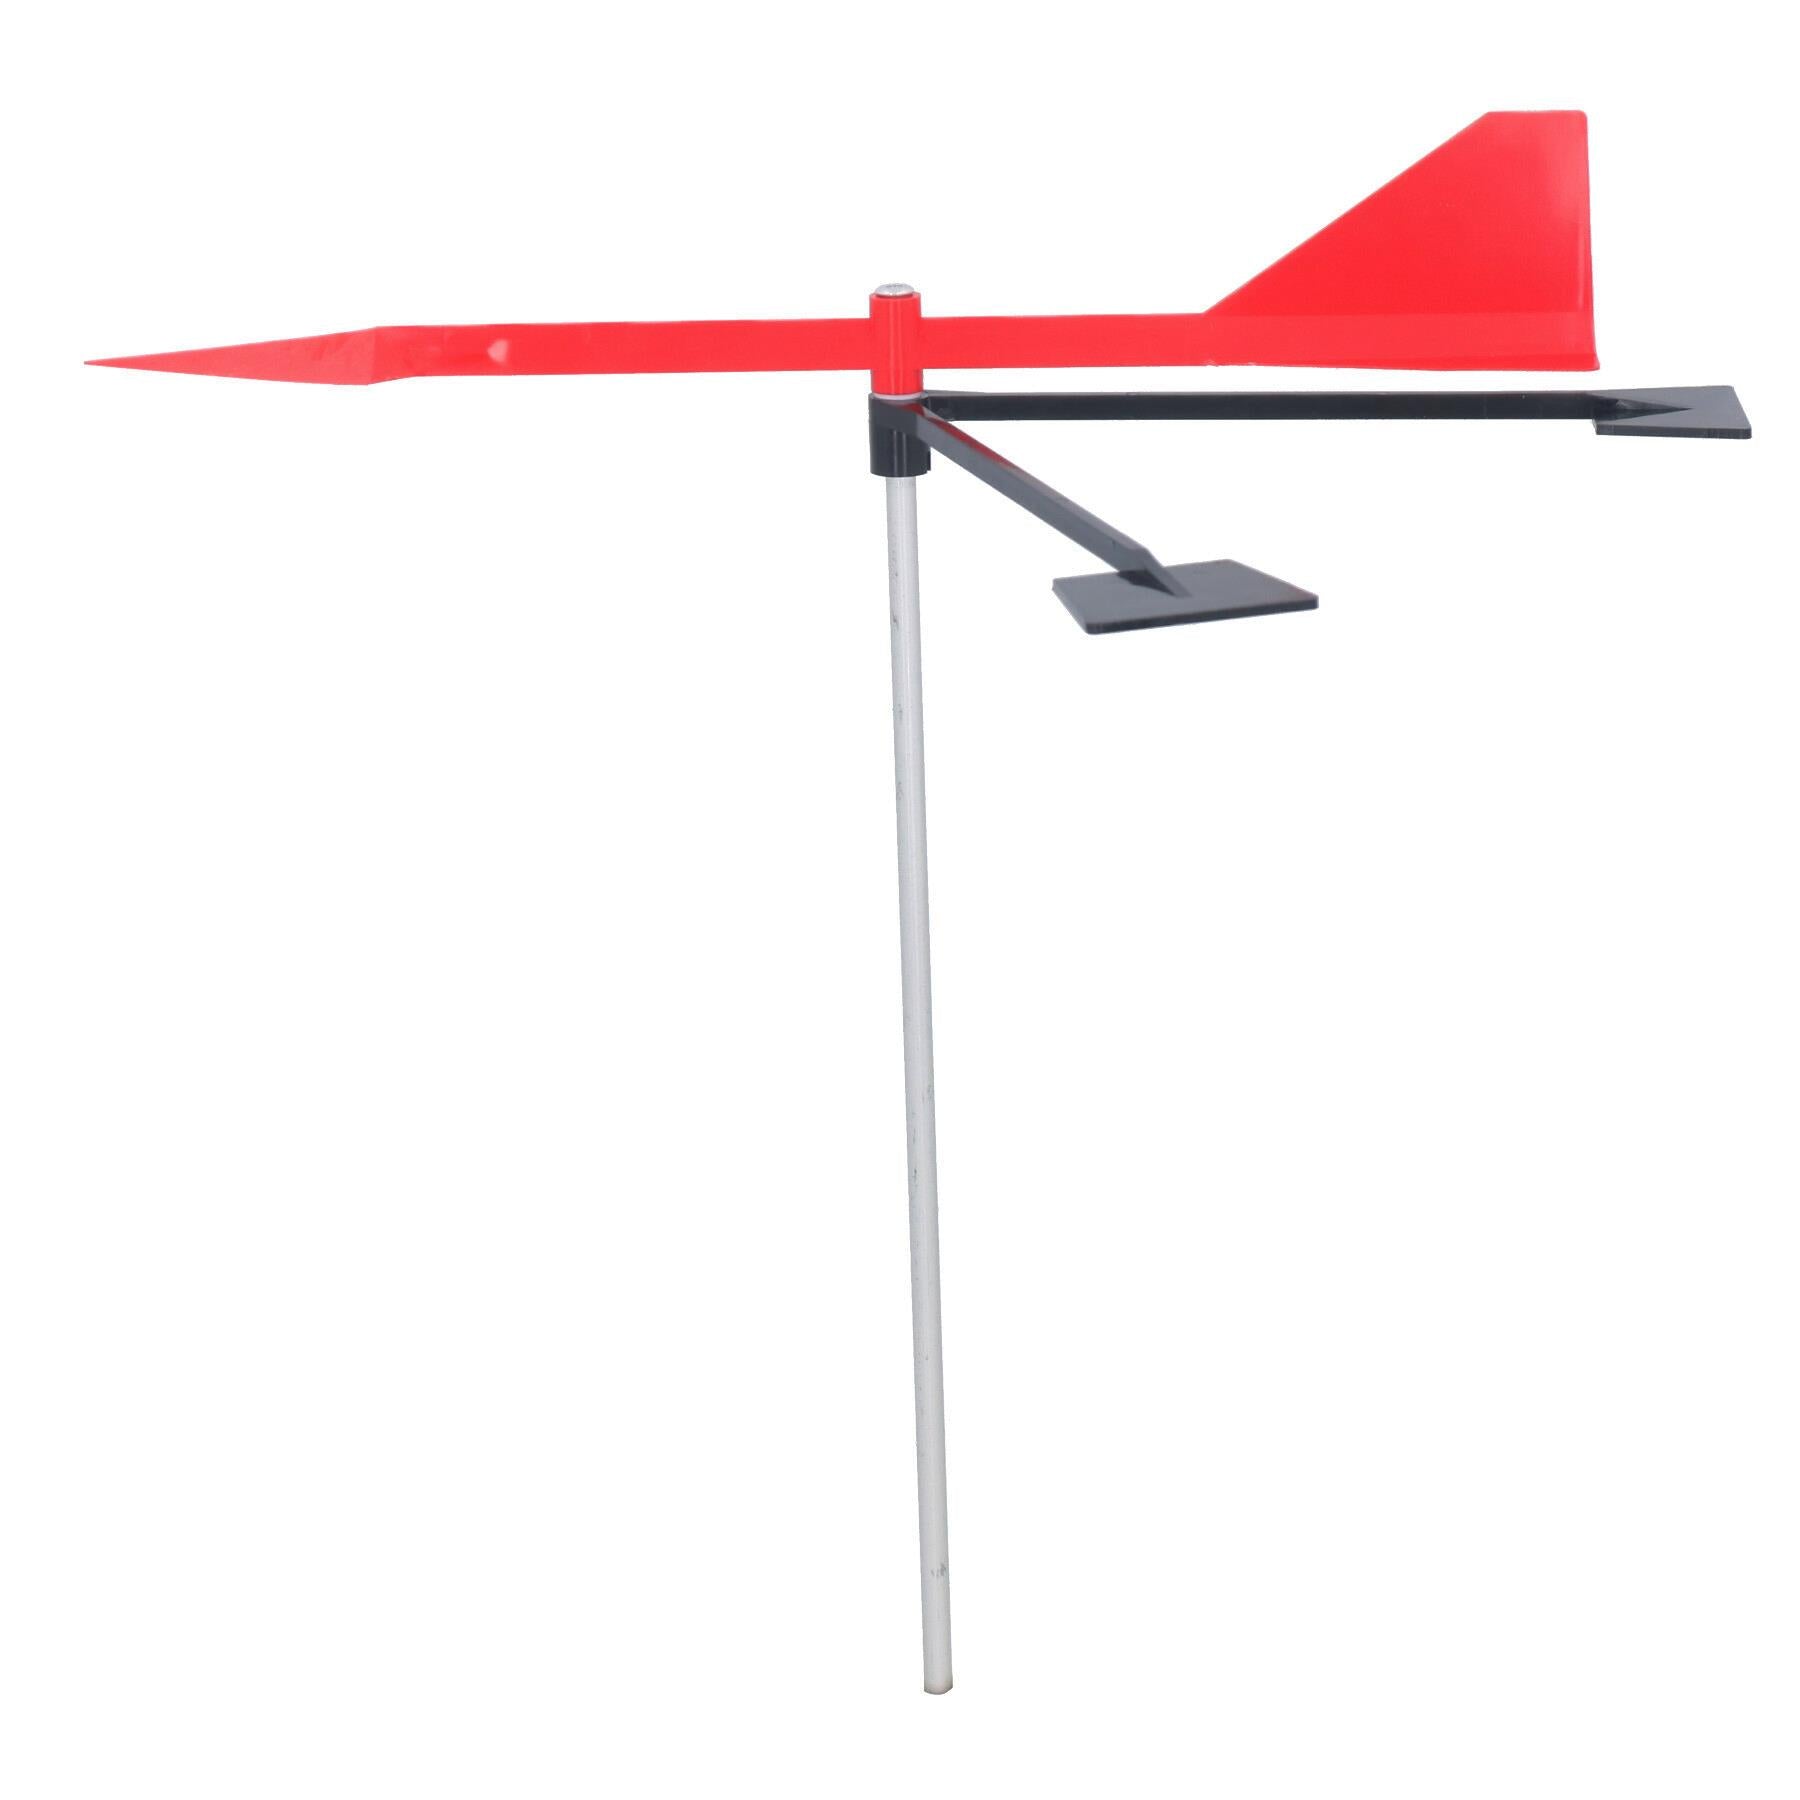 12" High Visibility Tempest Wind Direction Indicator Sailing Masthead Dinghy Yacht